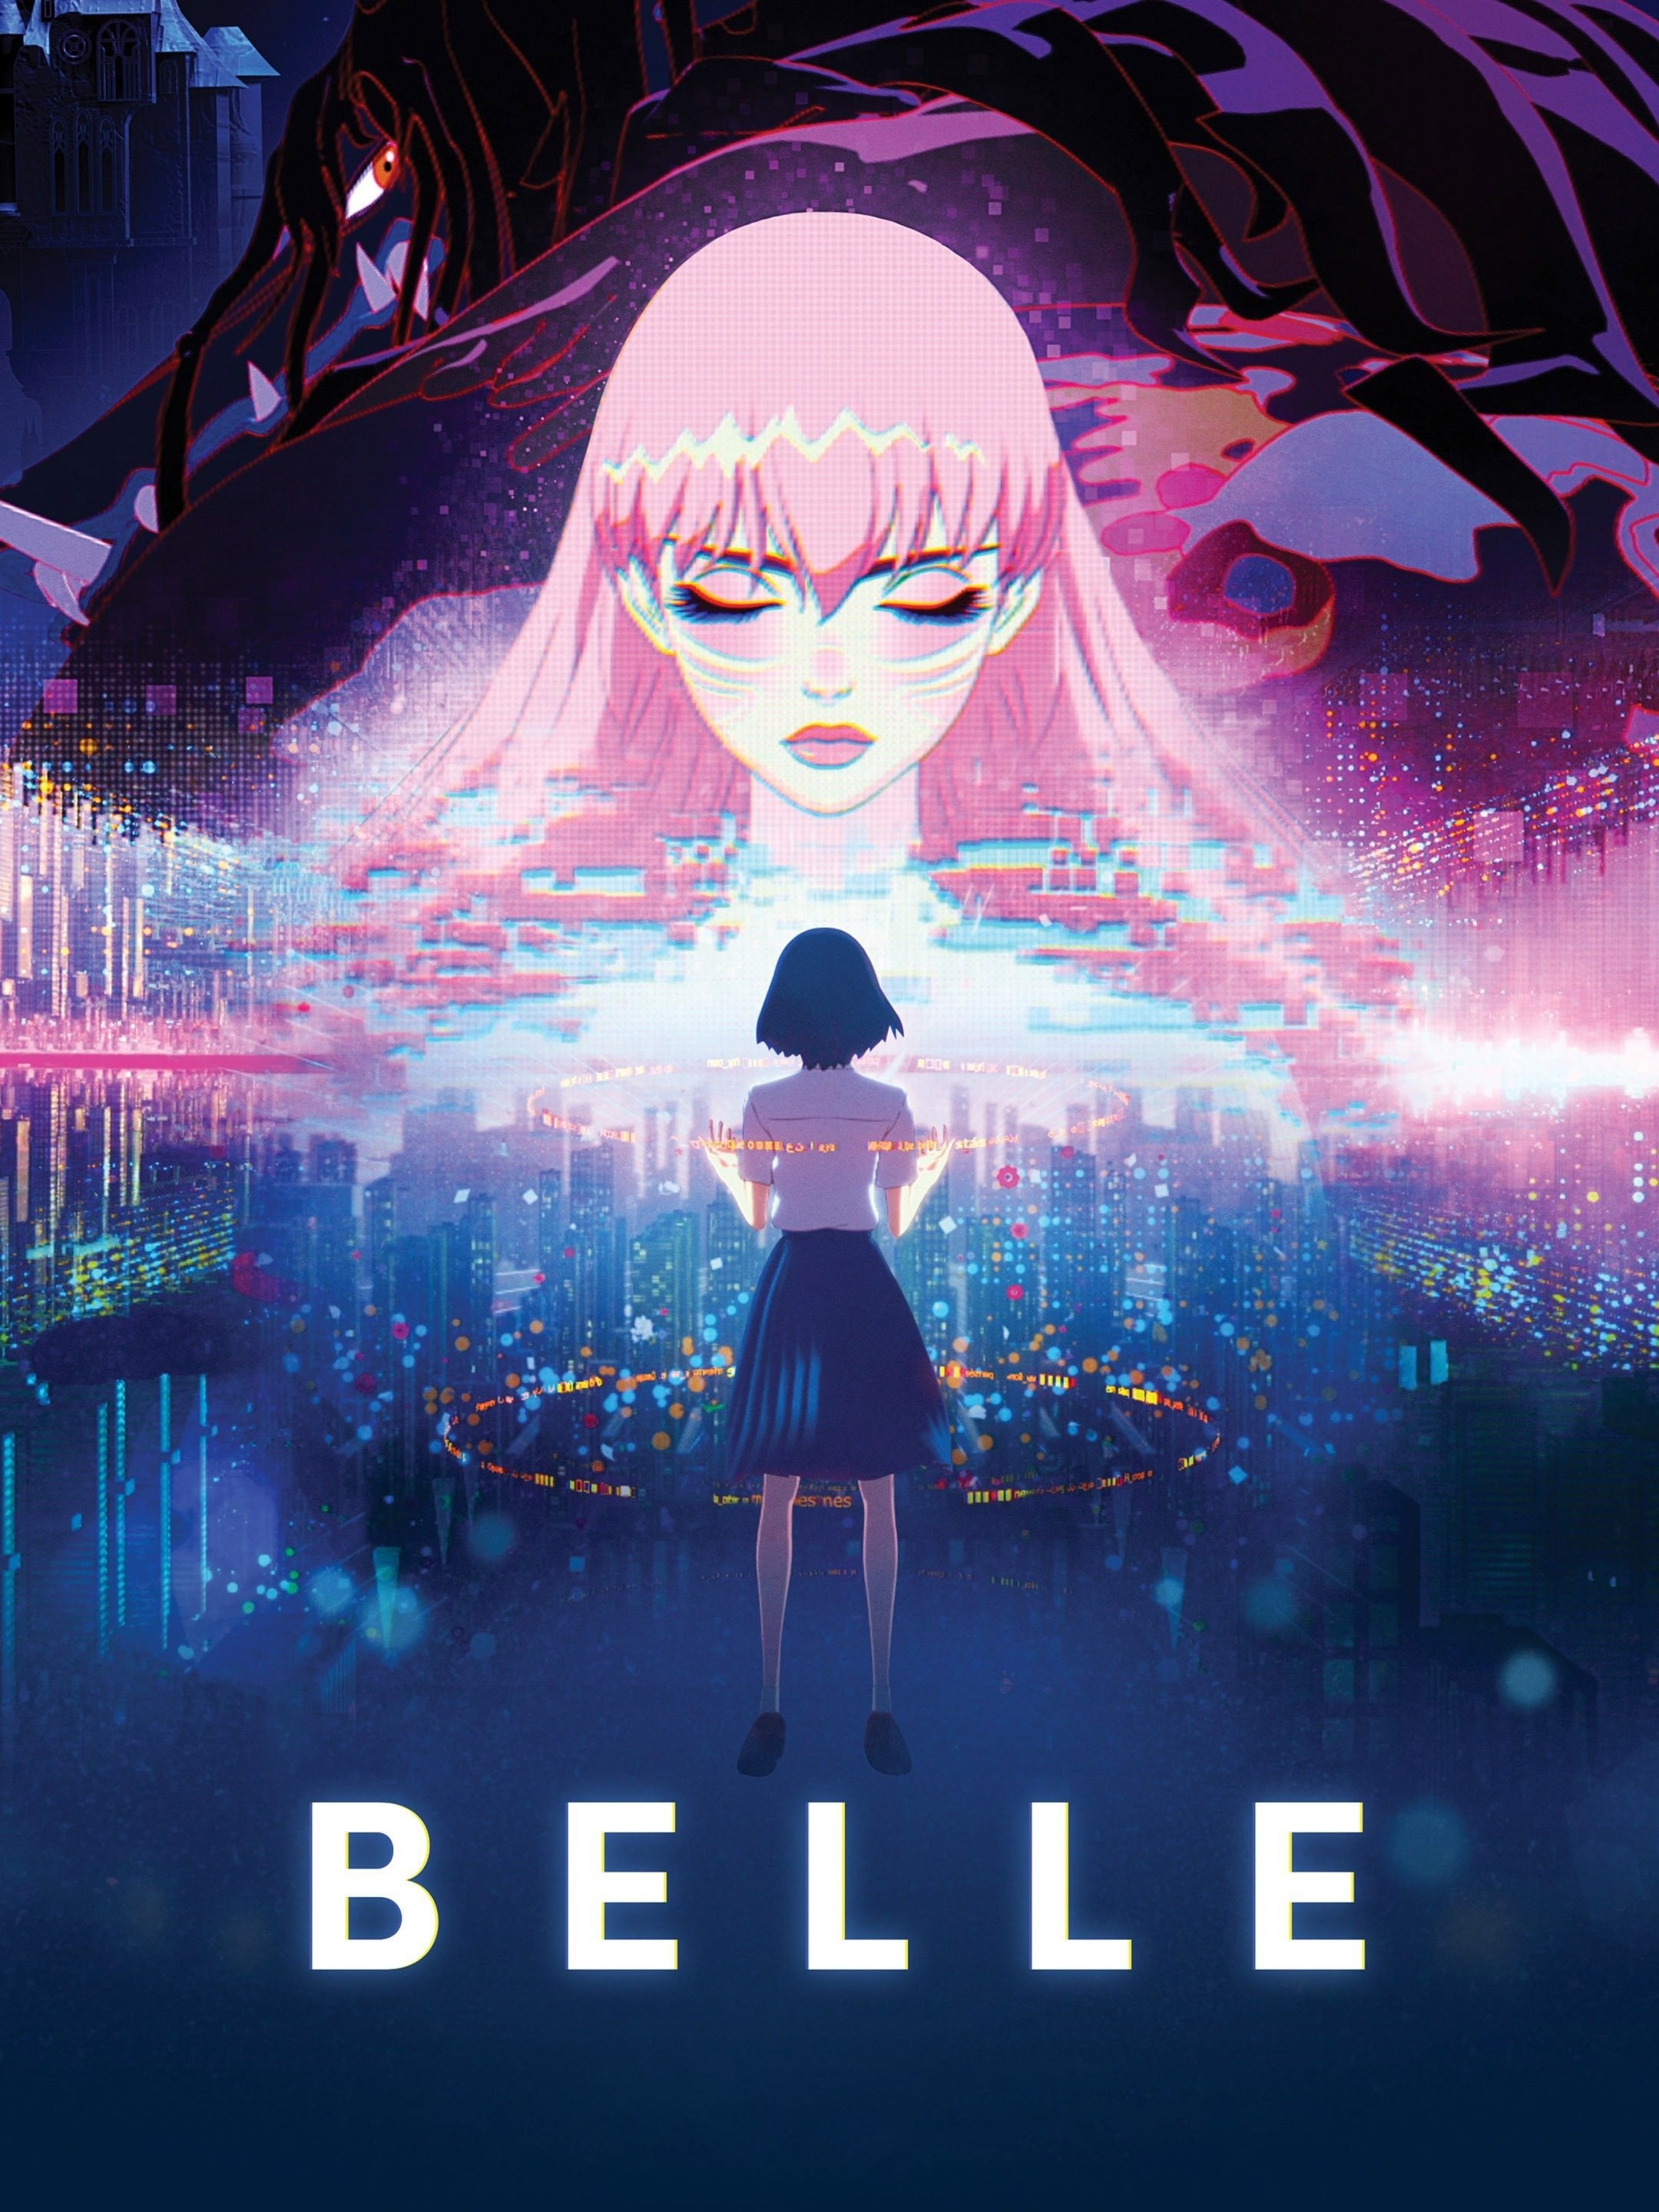 BELLE 2021  90 Second Trailer HQ  YouTube